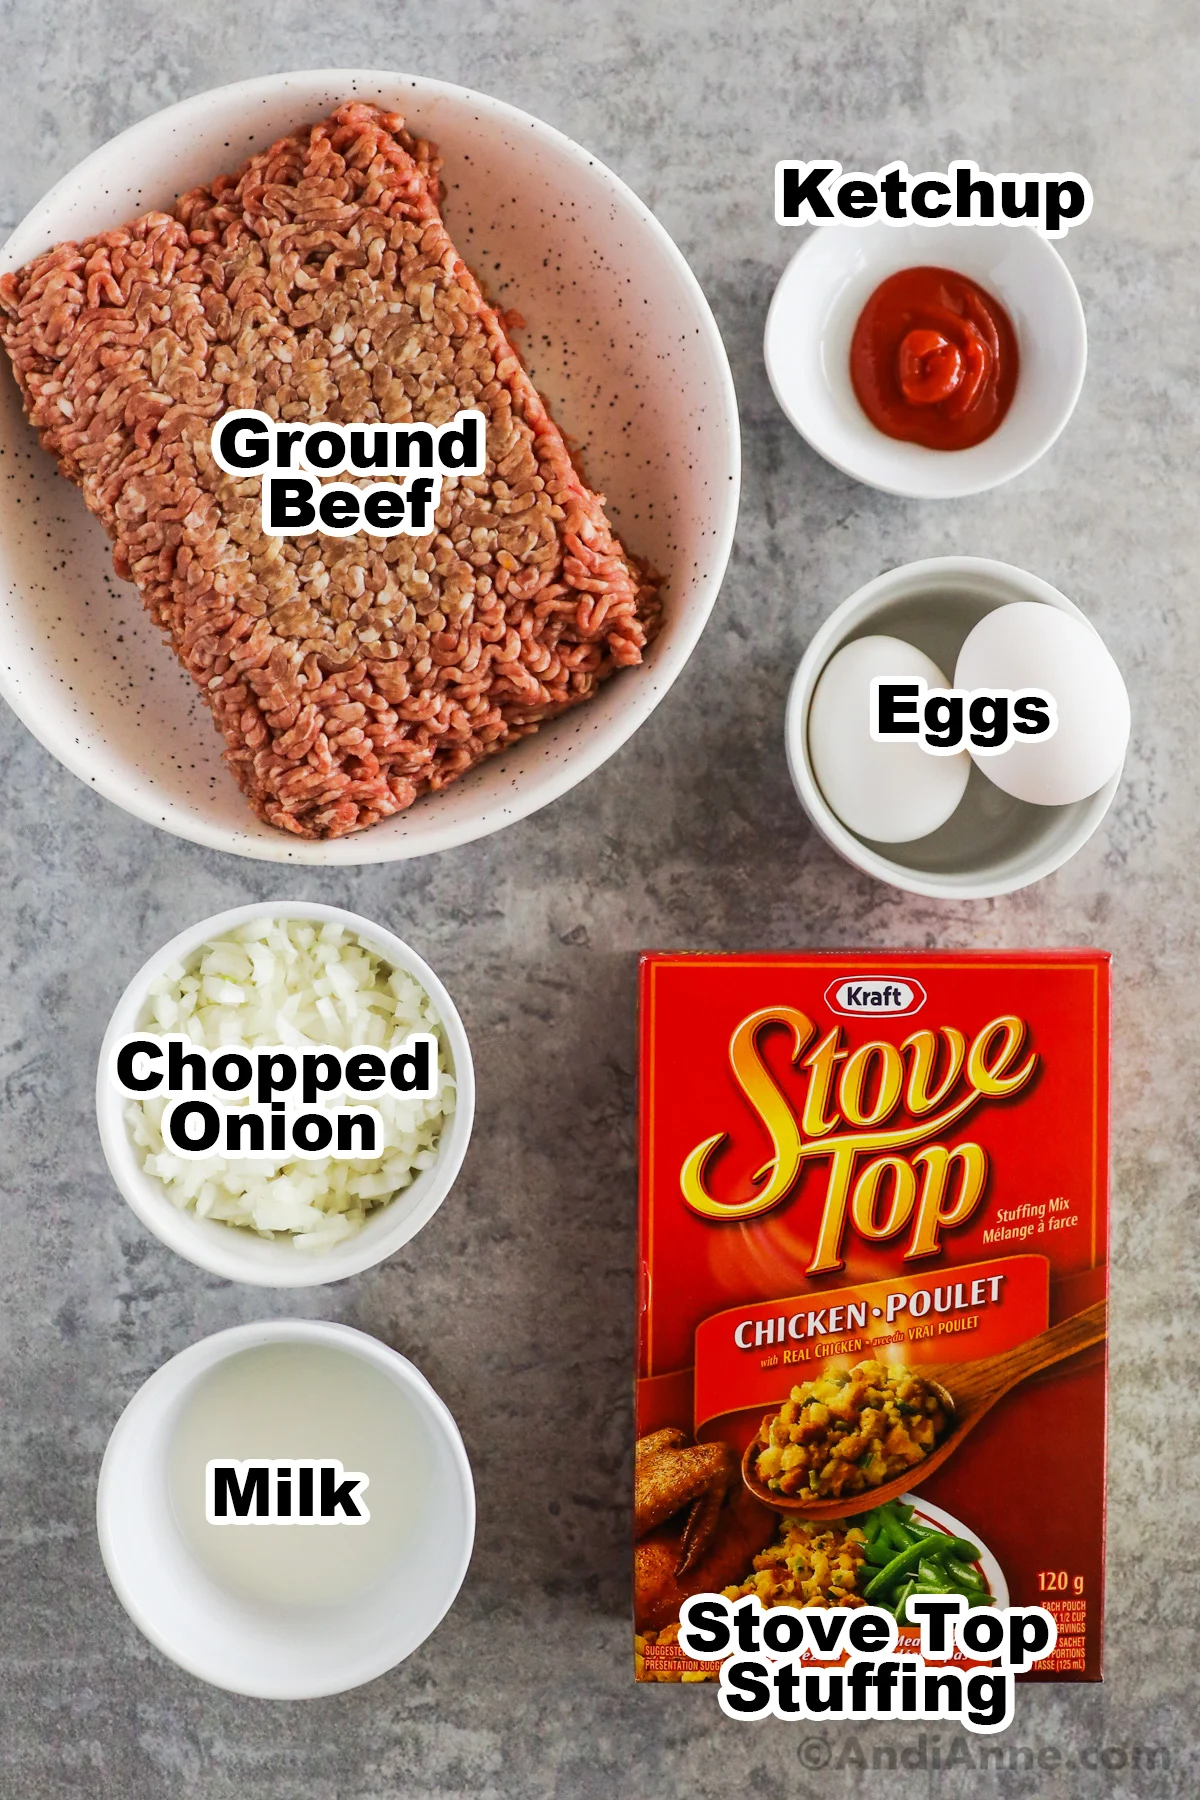 Recipe ingredients including box of stove top stuffing, raw ground beef on plate, and bowls with eggs, ketchup, chopped onion and milk.